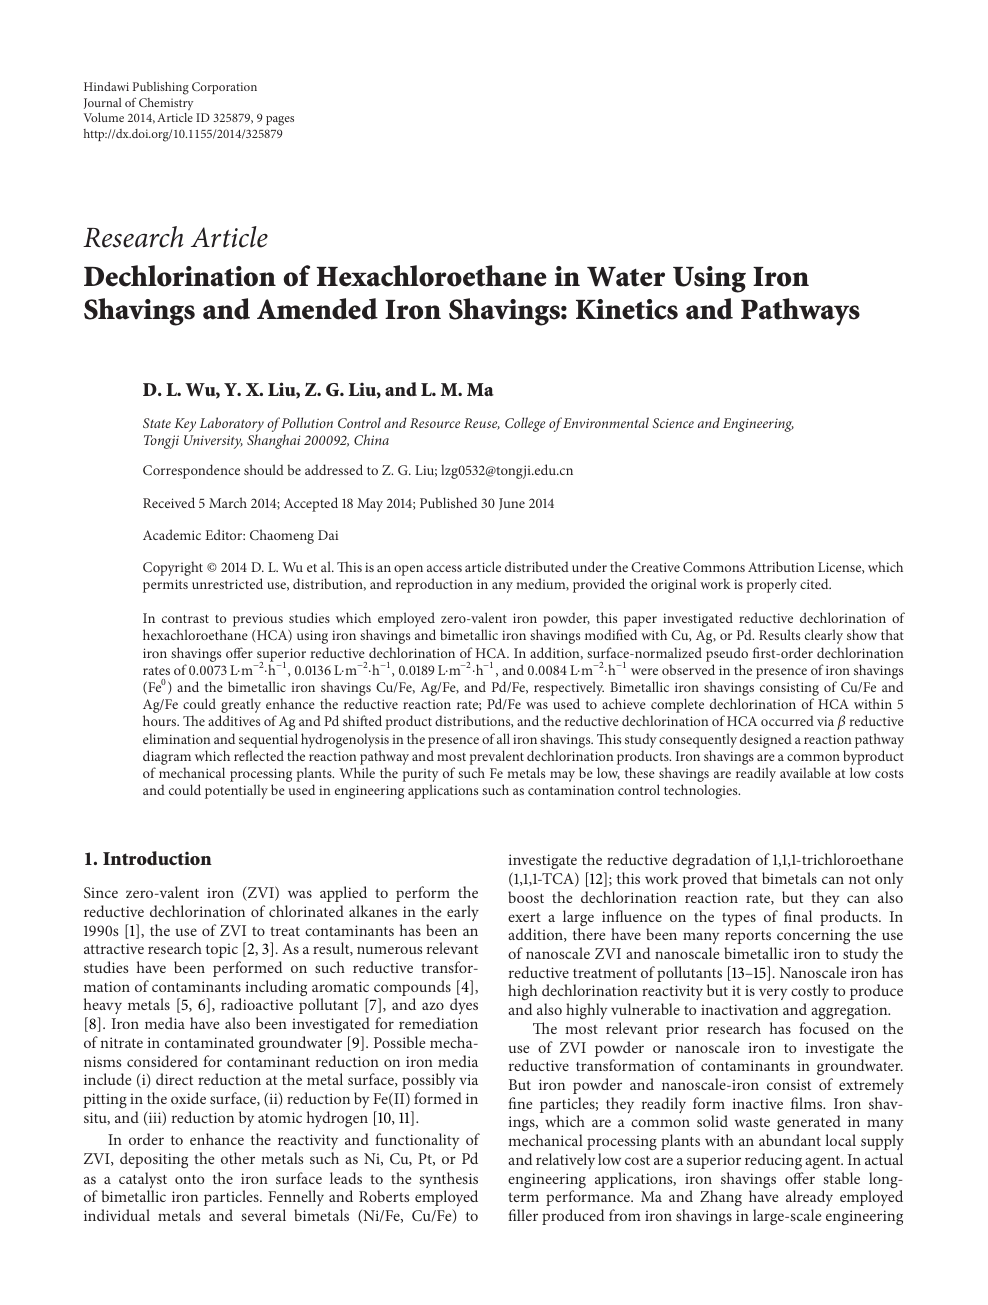 Dechlorination Of Hexachloroethane In Water Using Iron Shavings And Amended Iron Shavings Kinetics And Pathways Topic Of Research Paper In Nano Technology Download Scholarly Article Pdf And Read For Free On Cyberleninka